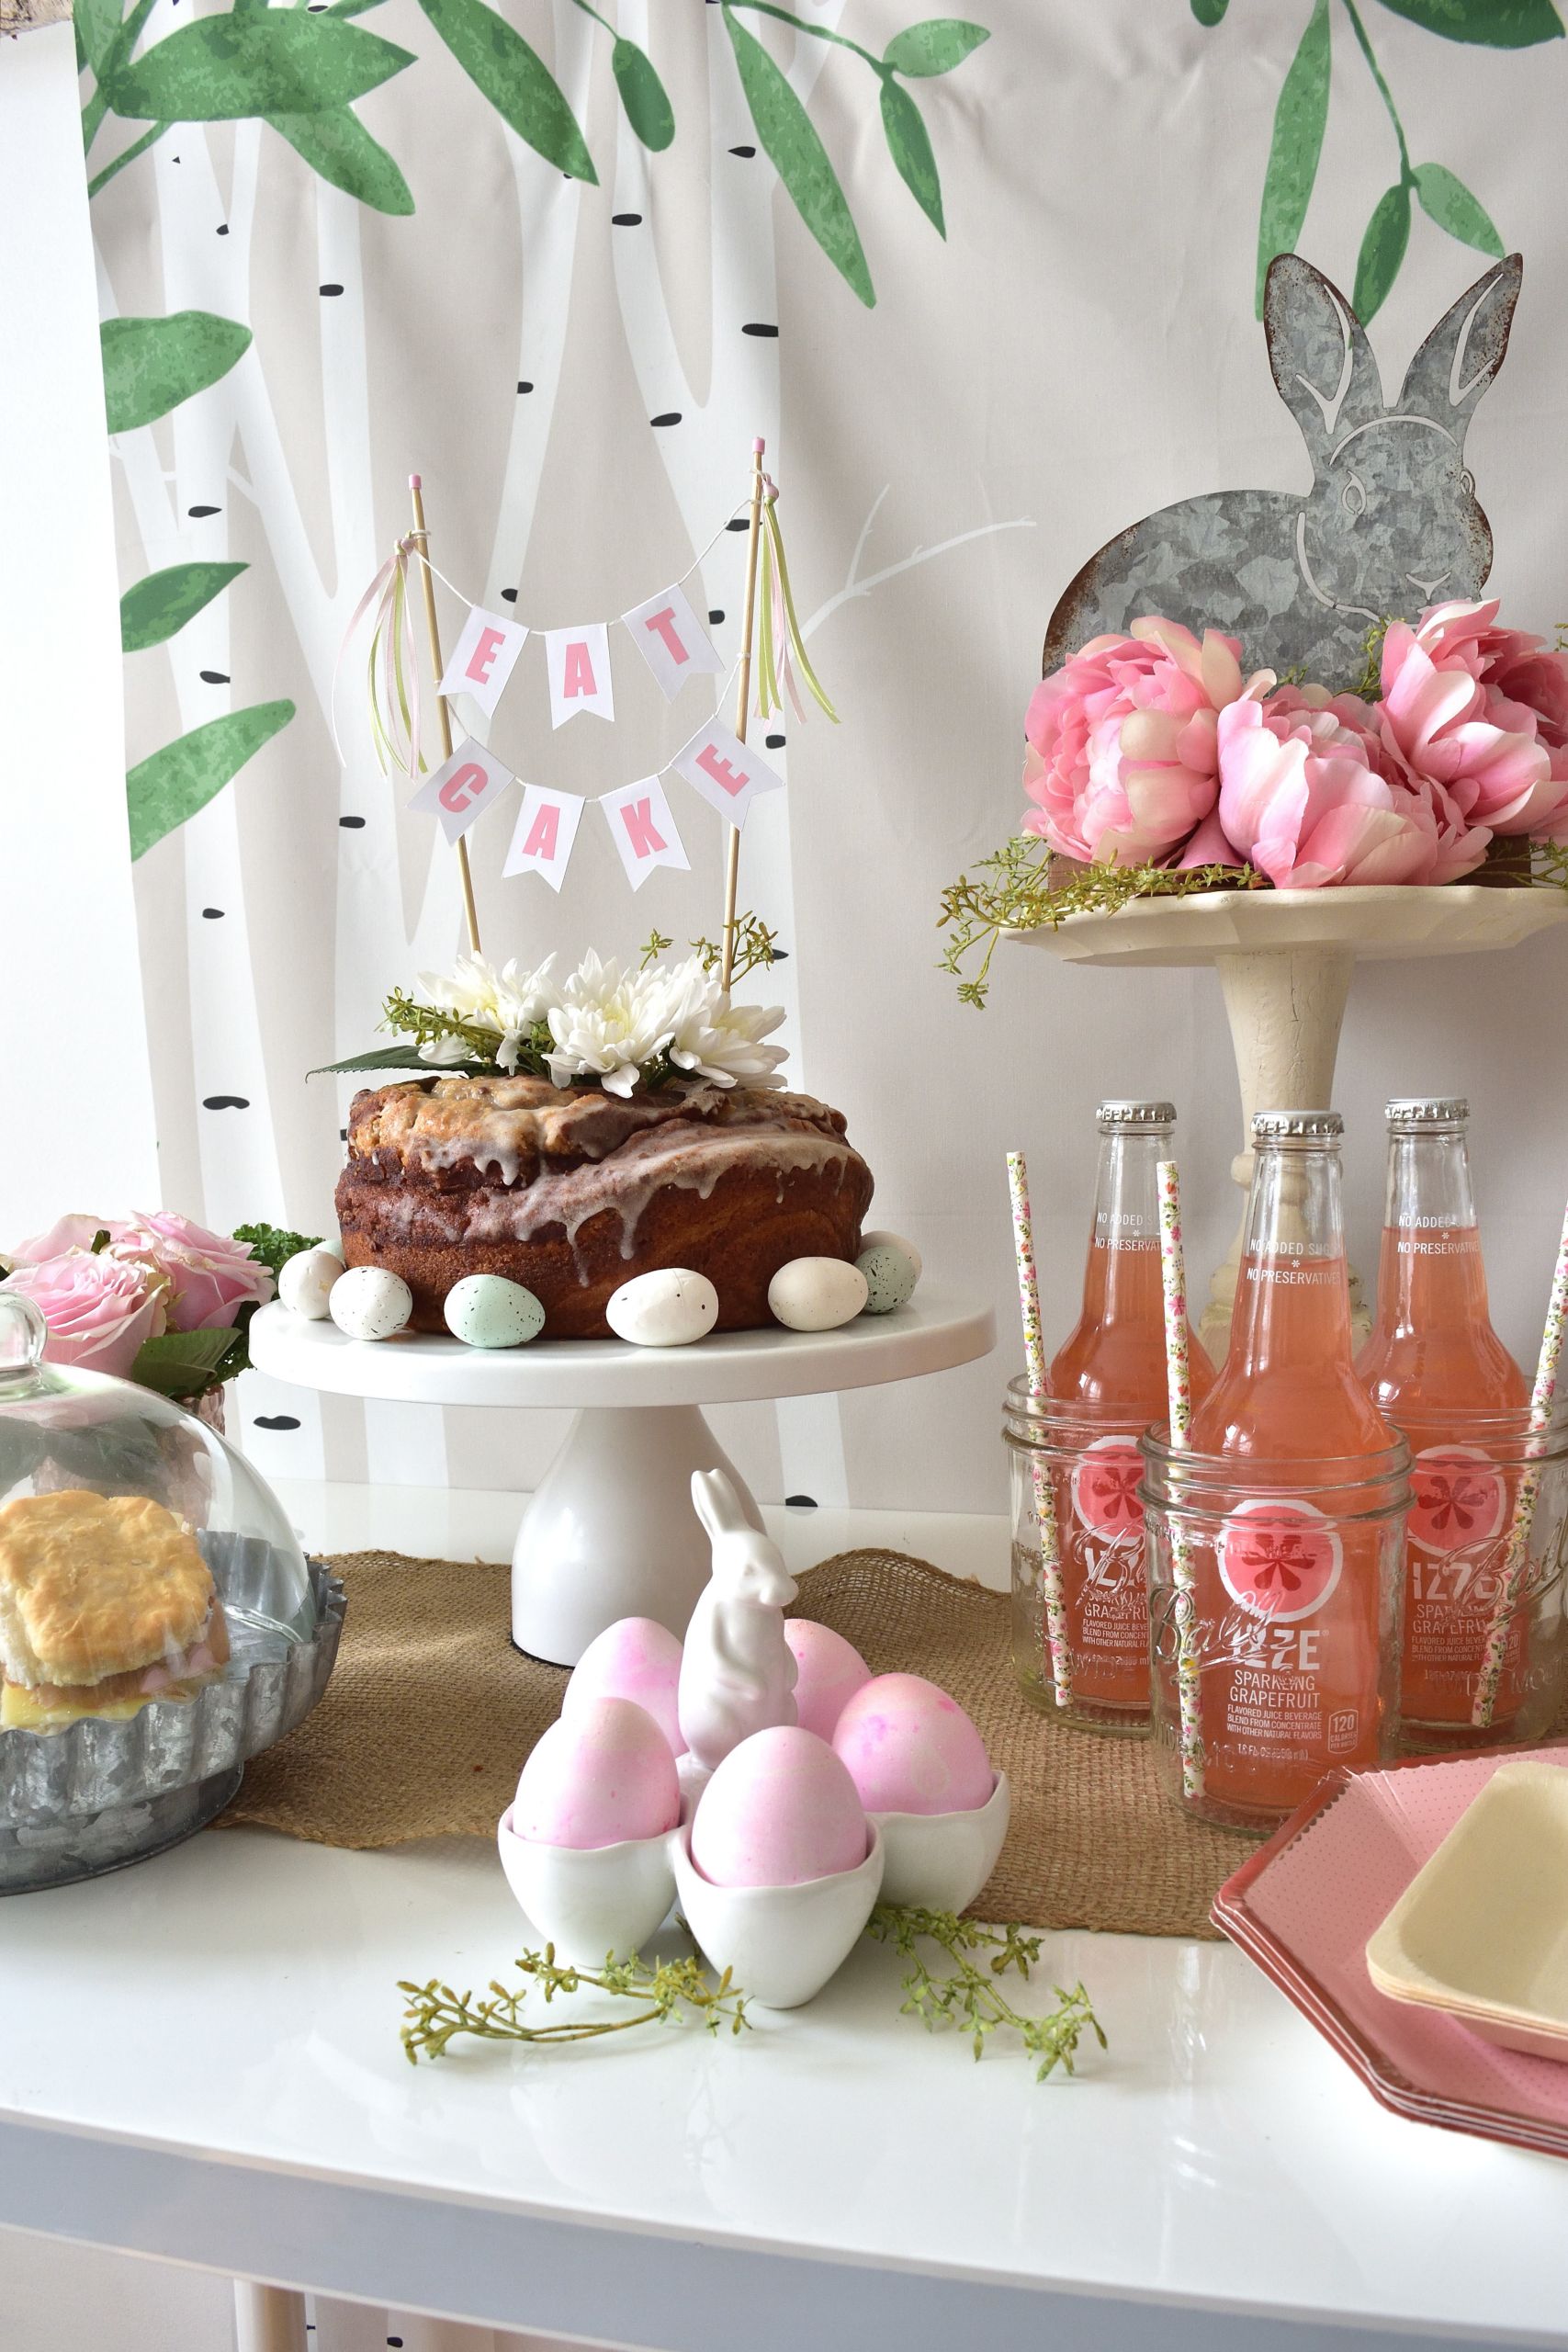 Easy Easter Breakfast Ideas
 Easter Brunch ideas that are fabulously simple and easy